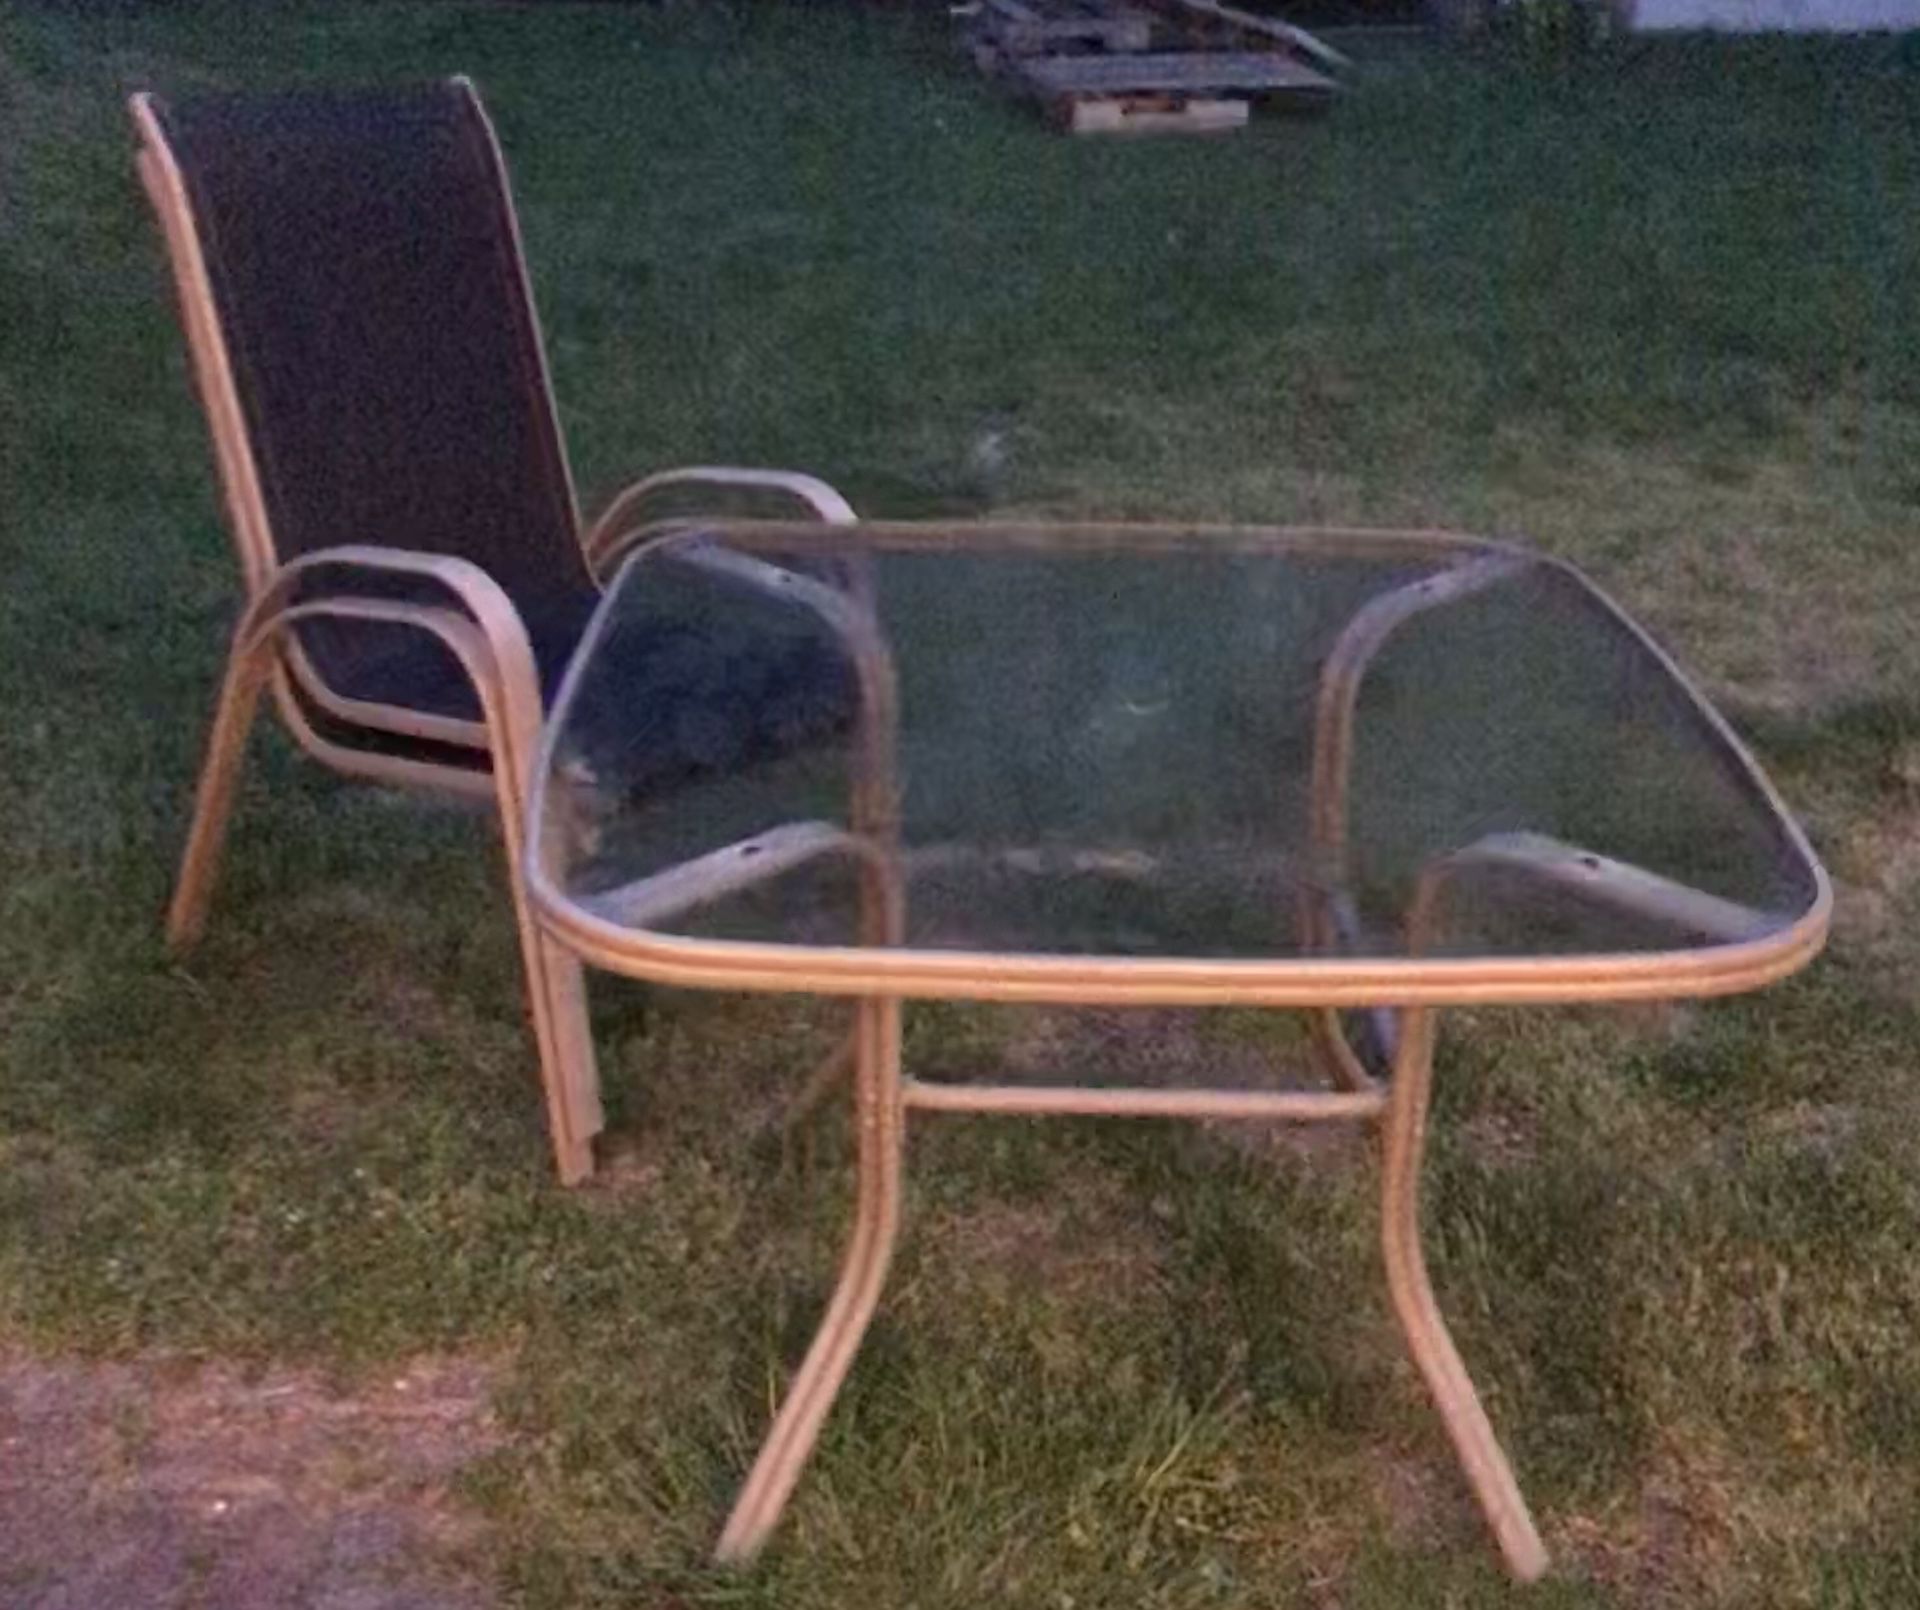 Glass patio table and chairs, decent shape